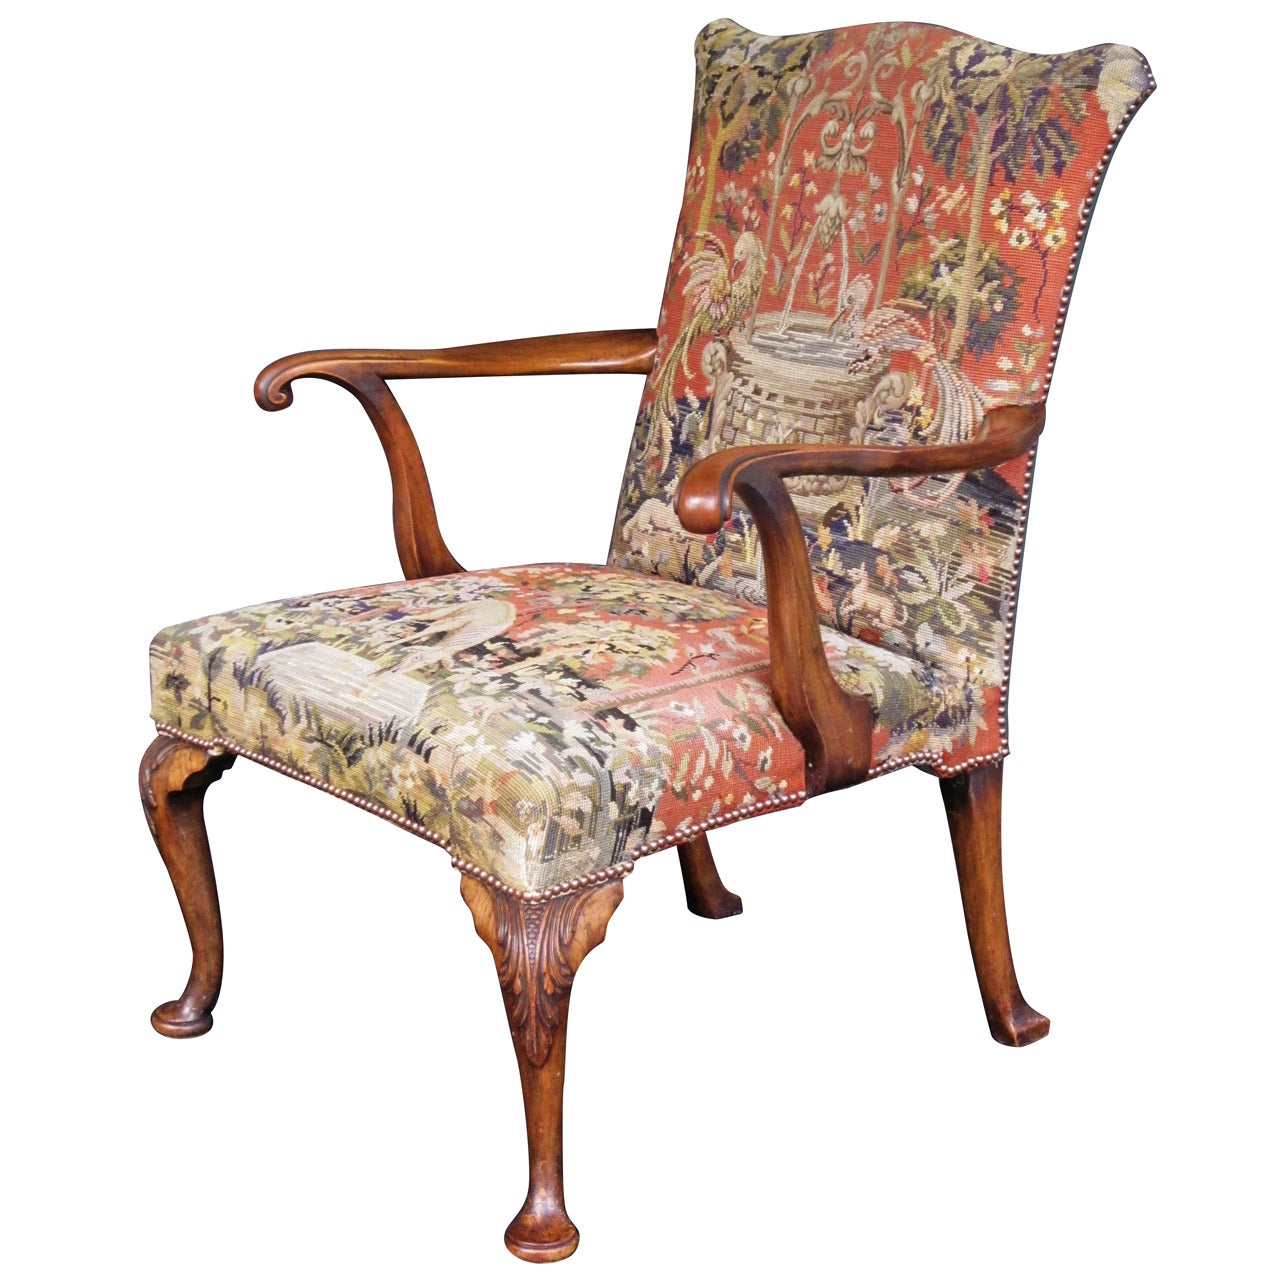 Large English Upholstered Arm Chair - Gainsborough Style